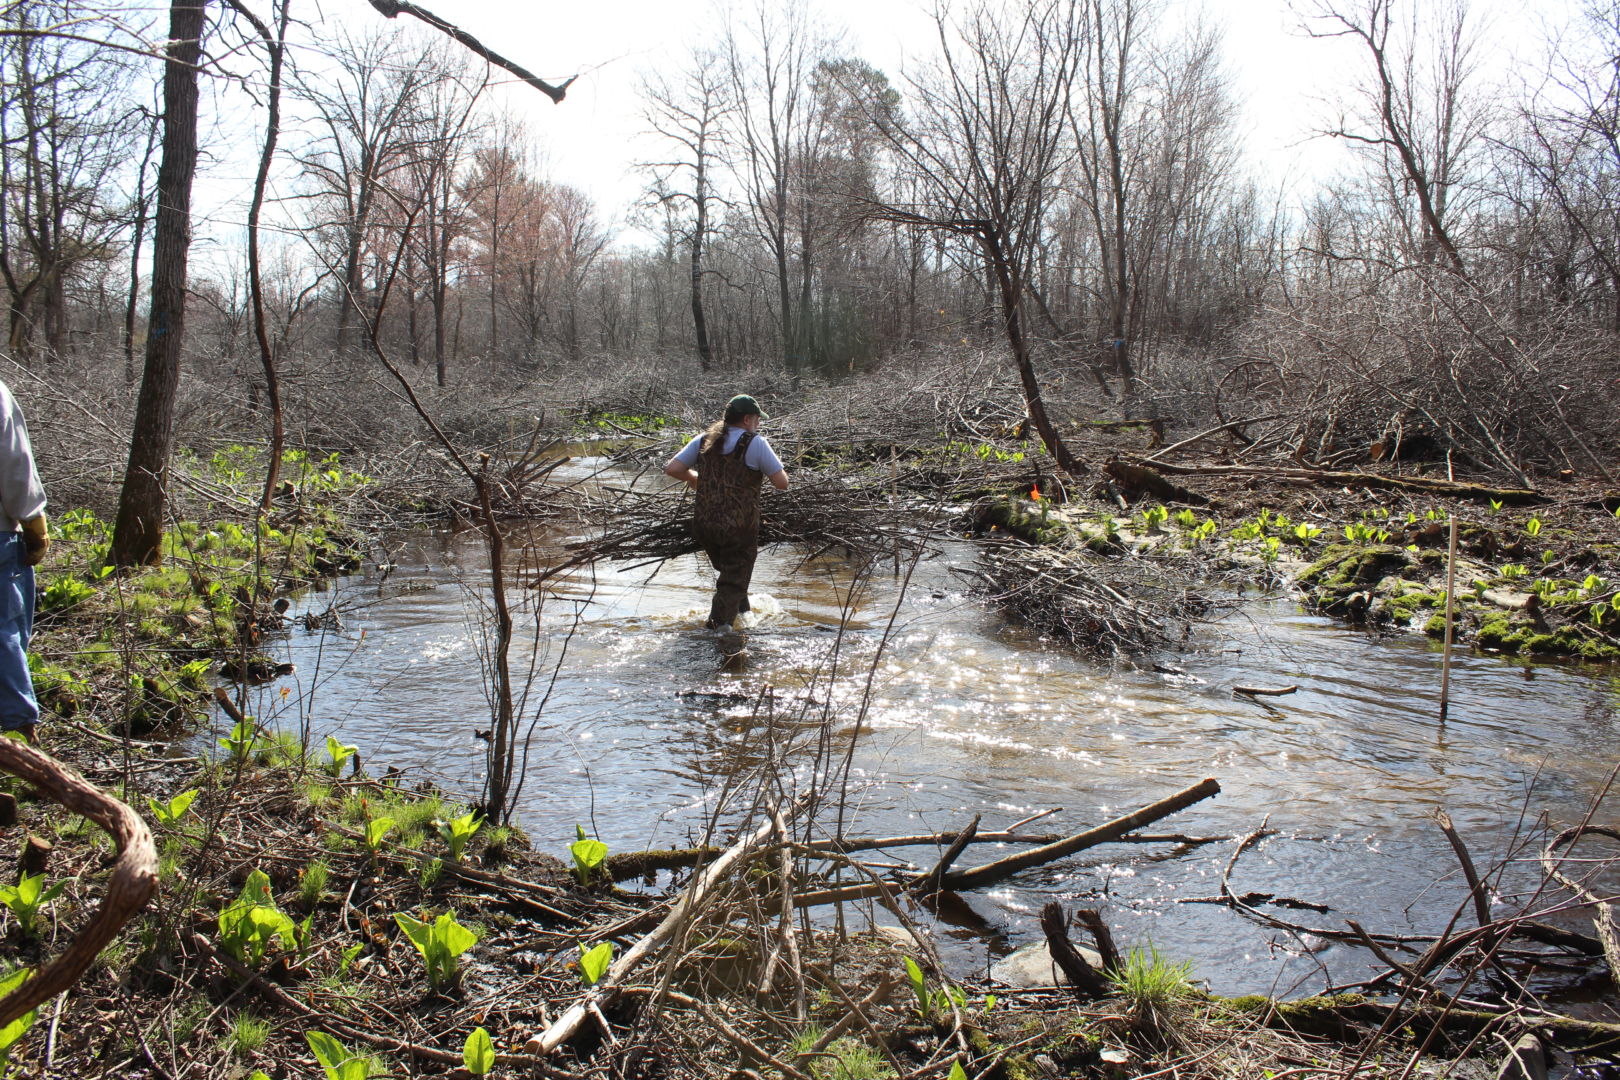 Volunteers help to line a portion of the Little Plover River with bundles (a common wetland restoration practice).